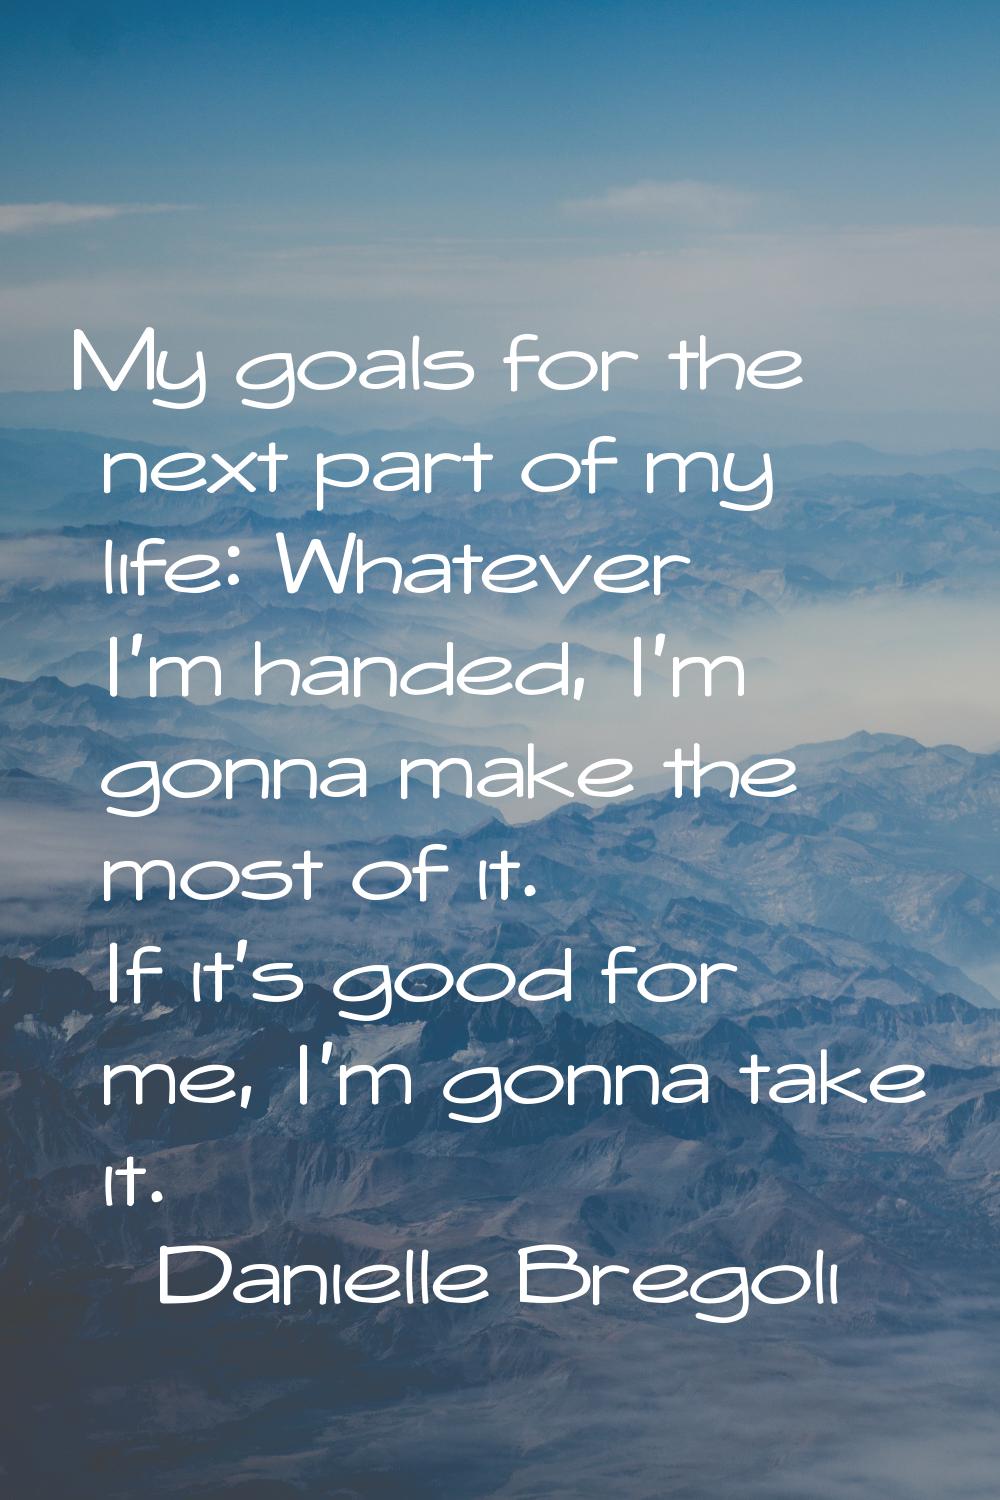 My goals for the next part of my life: Whatever I'm handed, I'm gonna make the most of it. If it's 